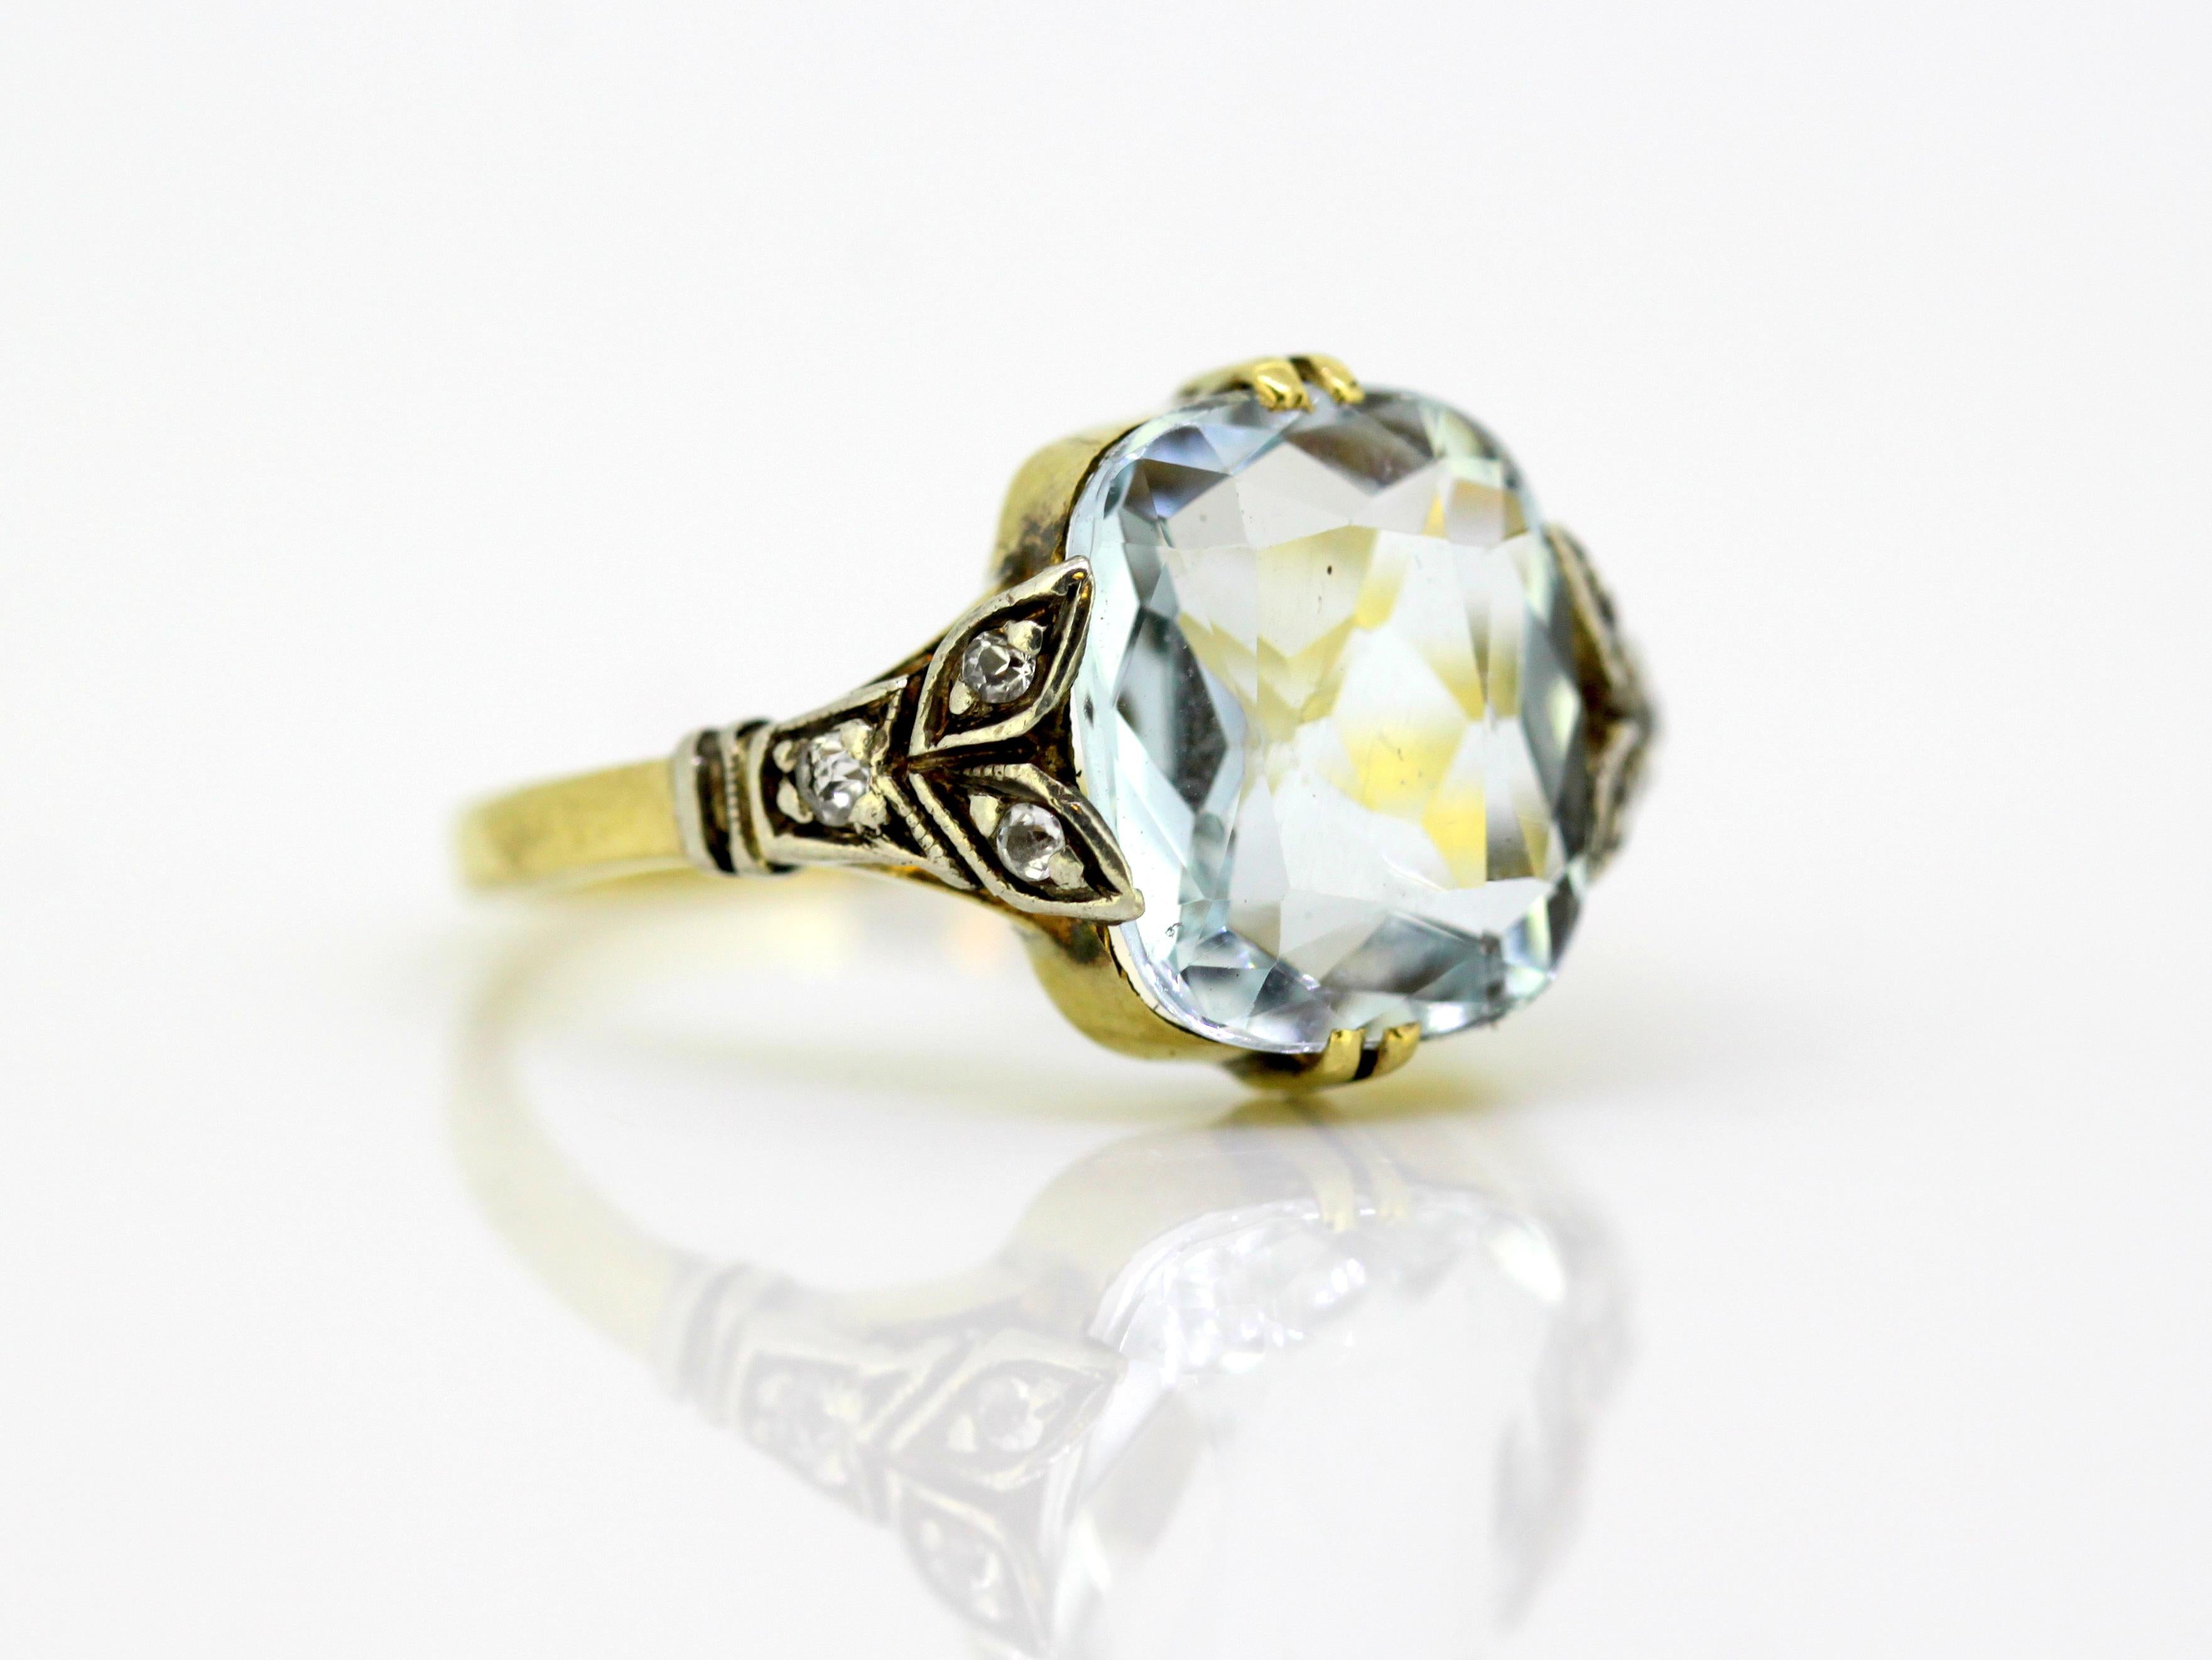 Art Deco 18k yellow gold ladies ring with aquamarine and diamonds 
Made in England, Circa 1920's 

Dimensions - 
Finger Size: (UK) = L (US) = 6 (EU) = 51 1/2 
Ring Size : 2.2 x 1.95 x 1.2 cm 
Weight : 3 grams 

Aquamarine - 
Cut : Cushion 
Approx